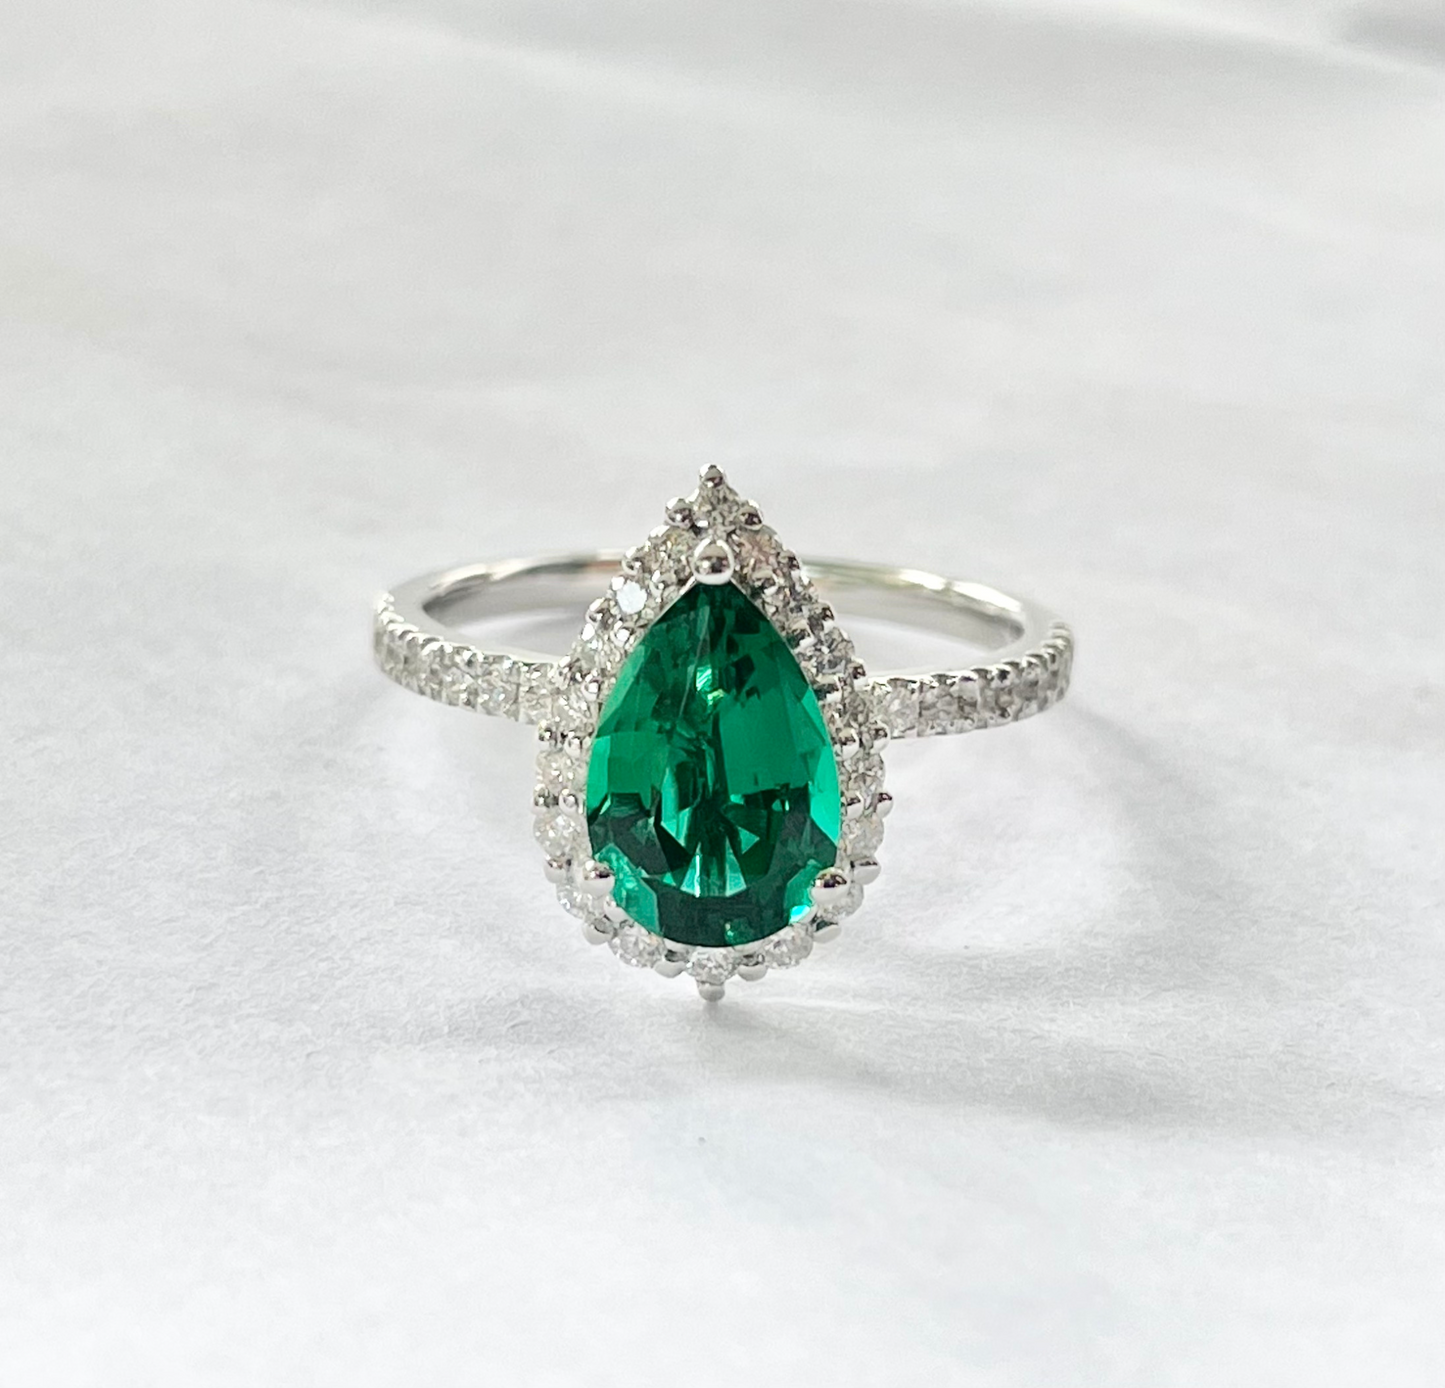 1.5ct Pear-shaped Emerald gemstone ring with halo in Pave setting